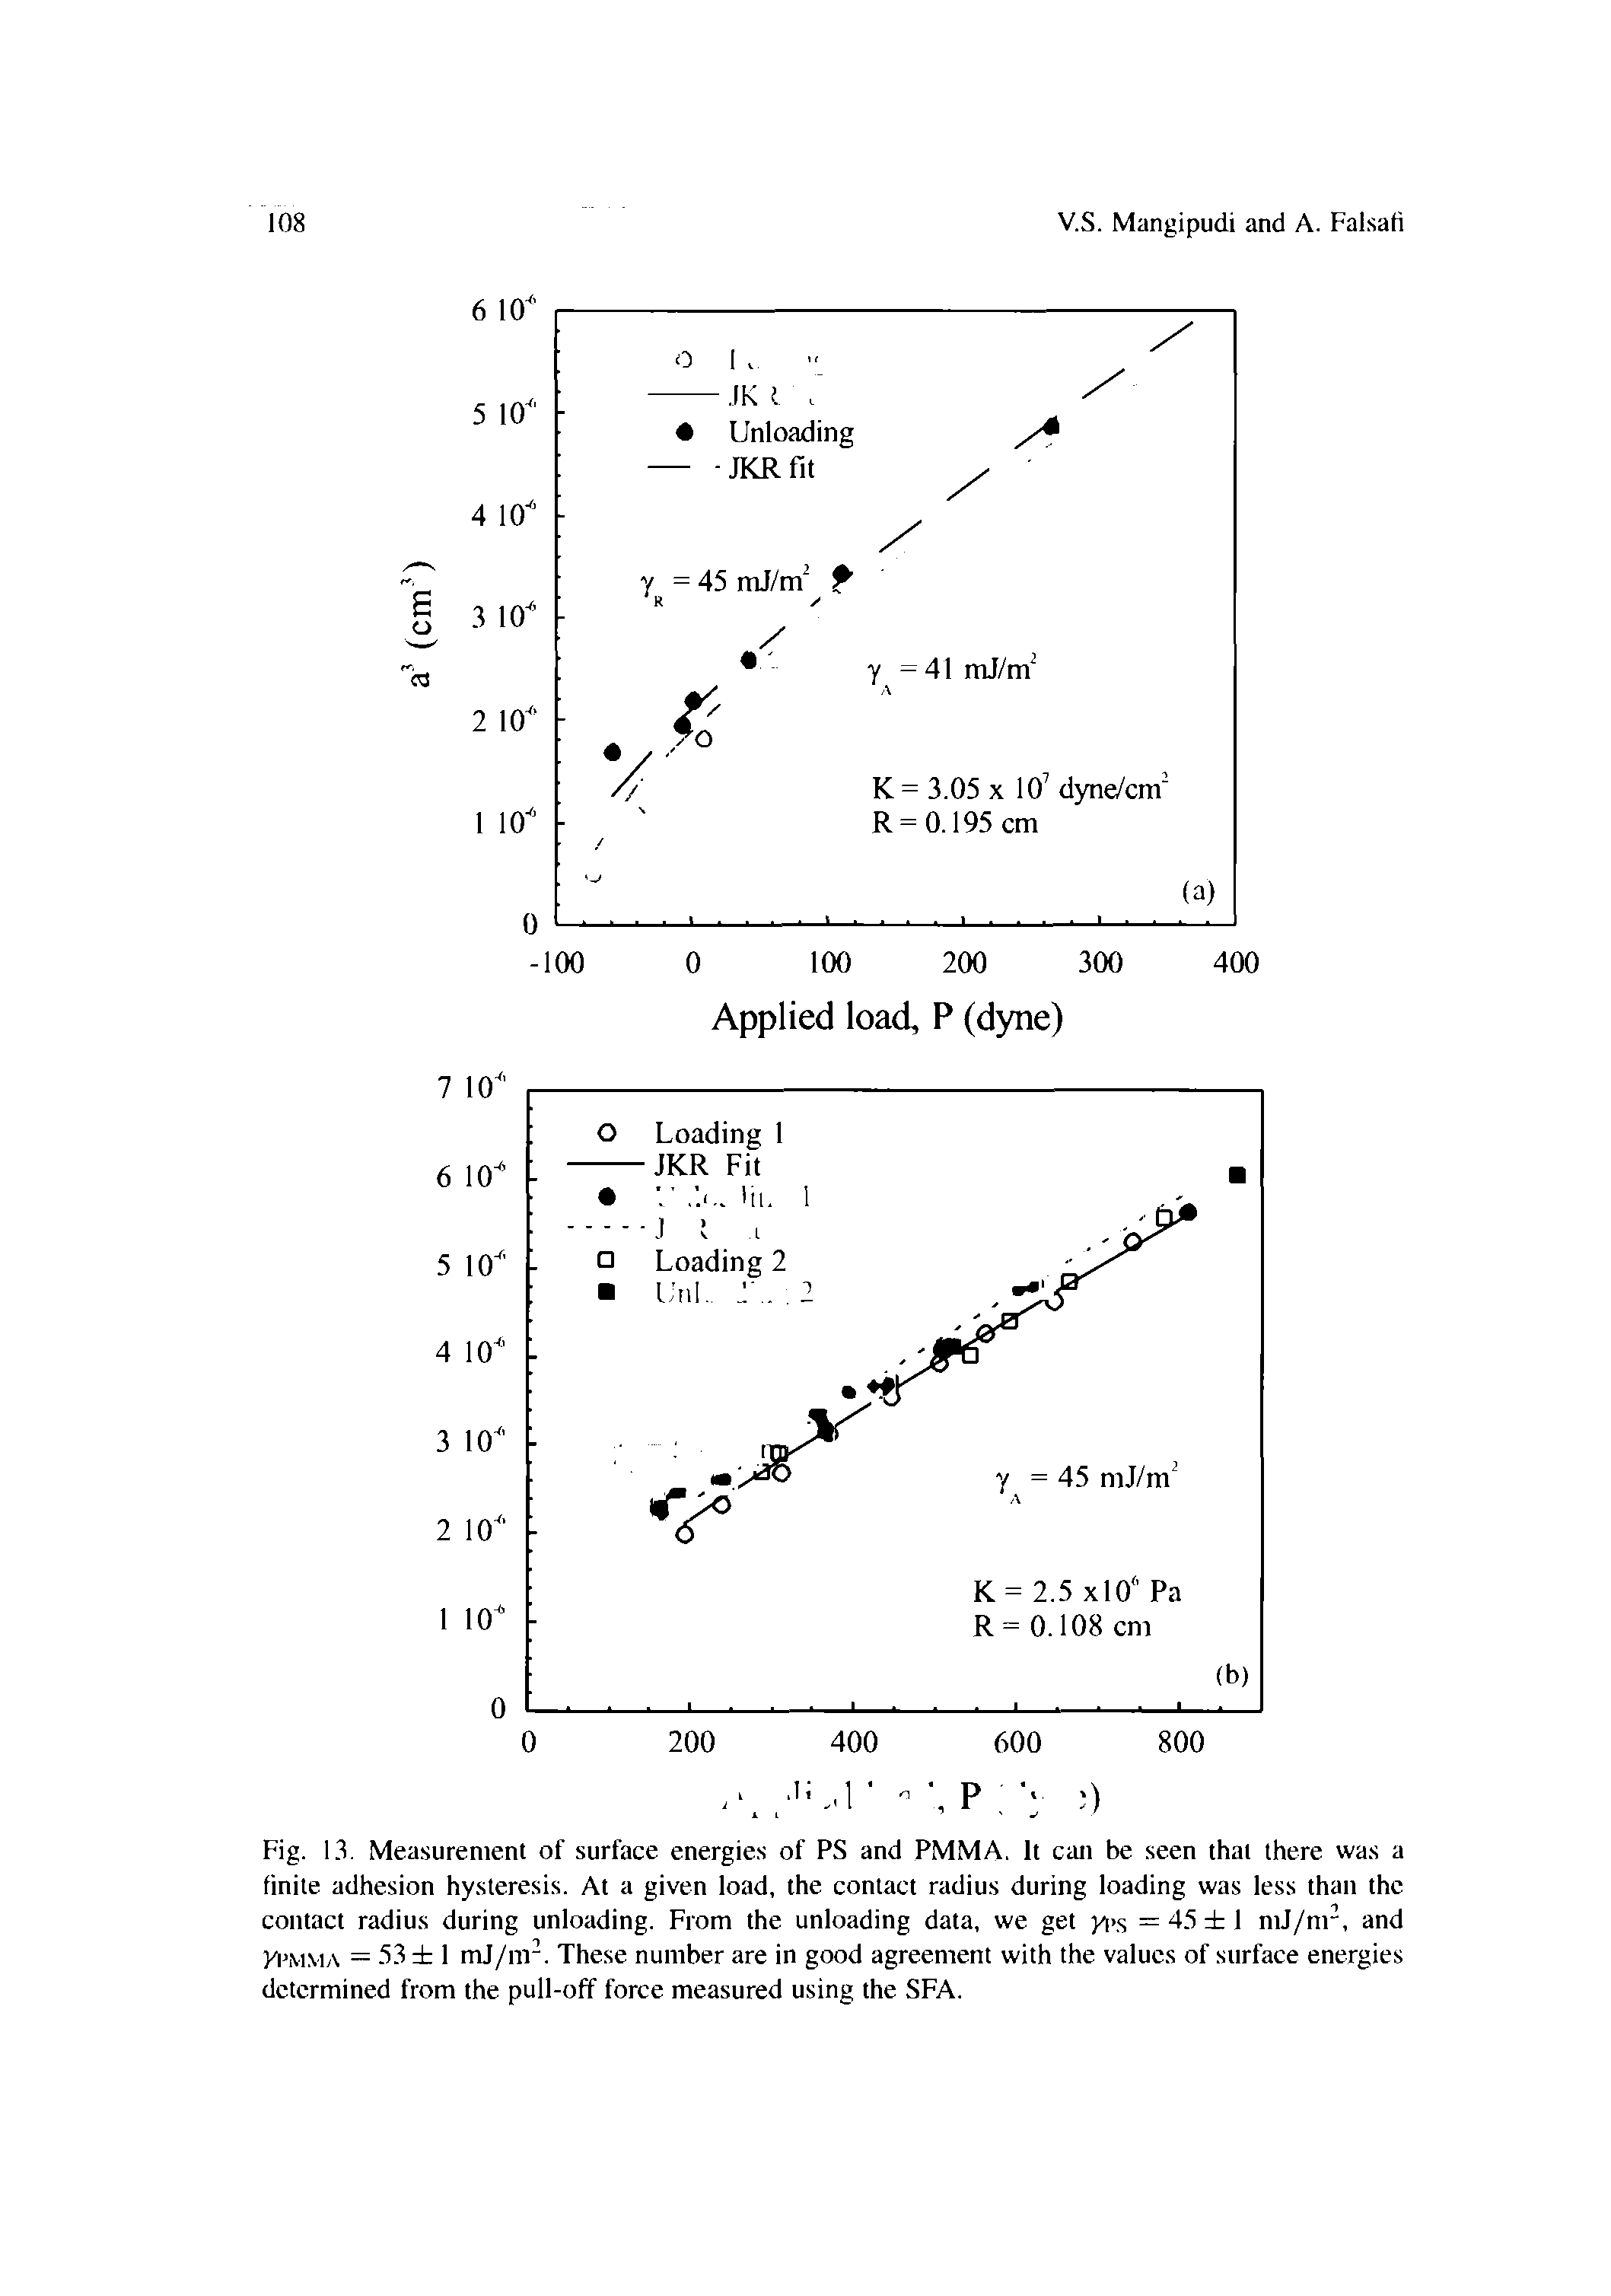 Fig. 13. Measurement of surface energies of PS and PMMA. It can be seen that there was a finite adhesion hysteresis. At a given load, the contact radius during loading was less than the contact radius during unloading. From the unloading data, we get yi>s = 45 1 mJ/nr, and yi),viMA = 53 1 mj/m . These number are in good agreement with the values of surface energies determined from the pull-off force measured using the SFA.